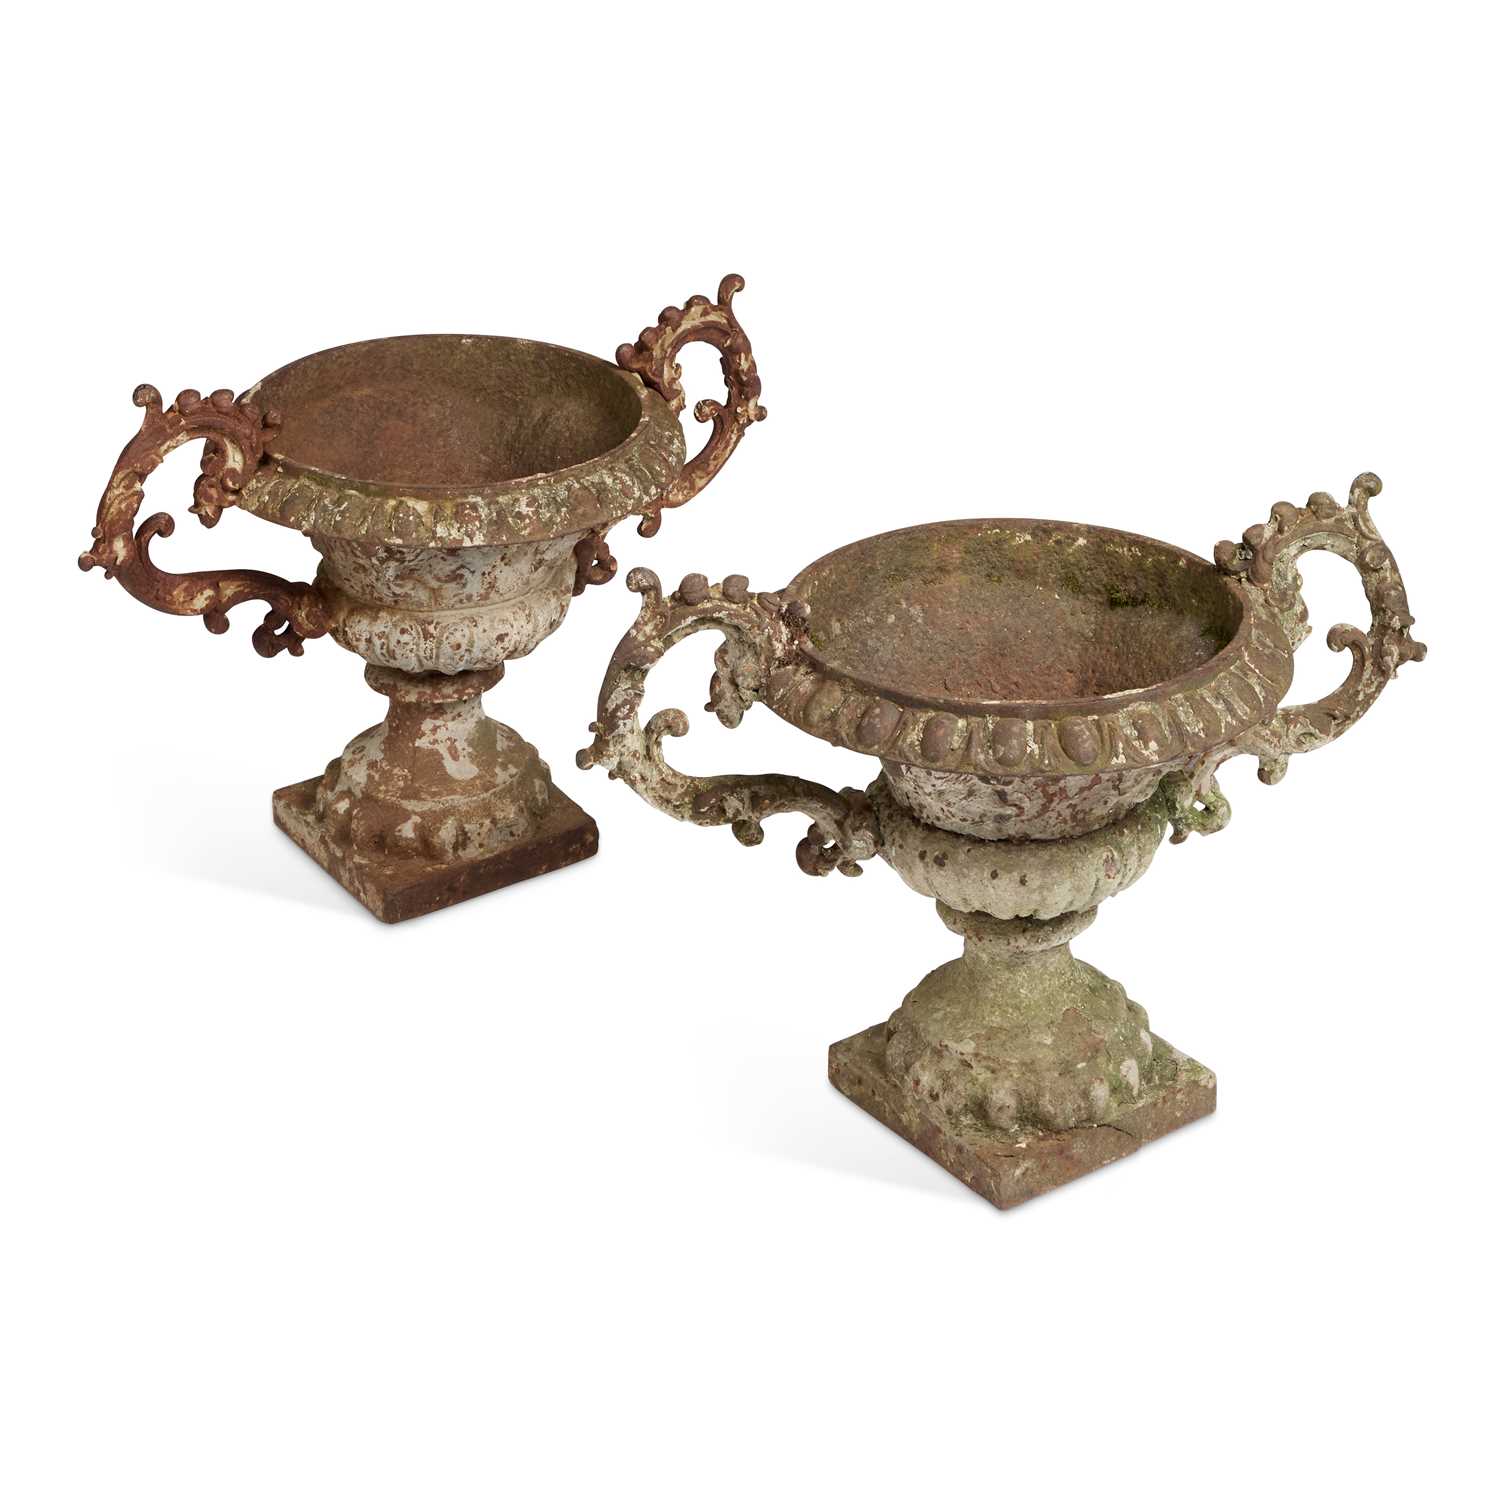 A PAIR OF 19TH CENTURY CAST IRON URNS